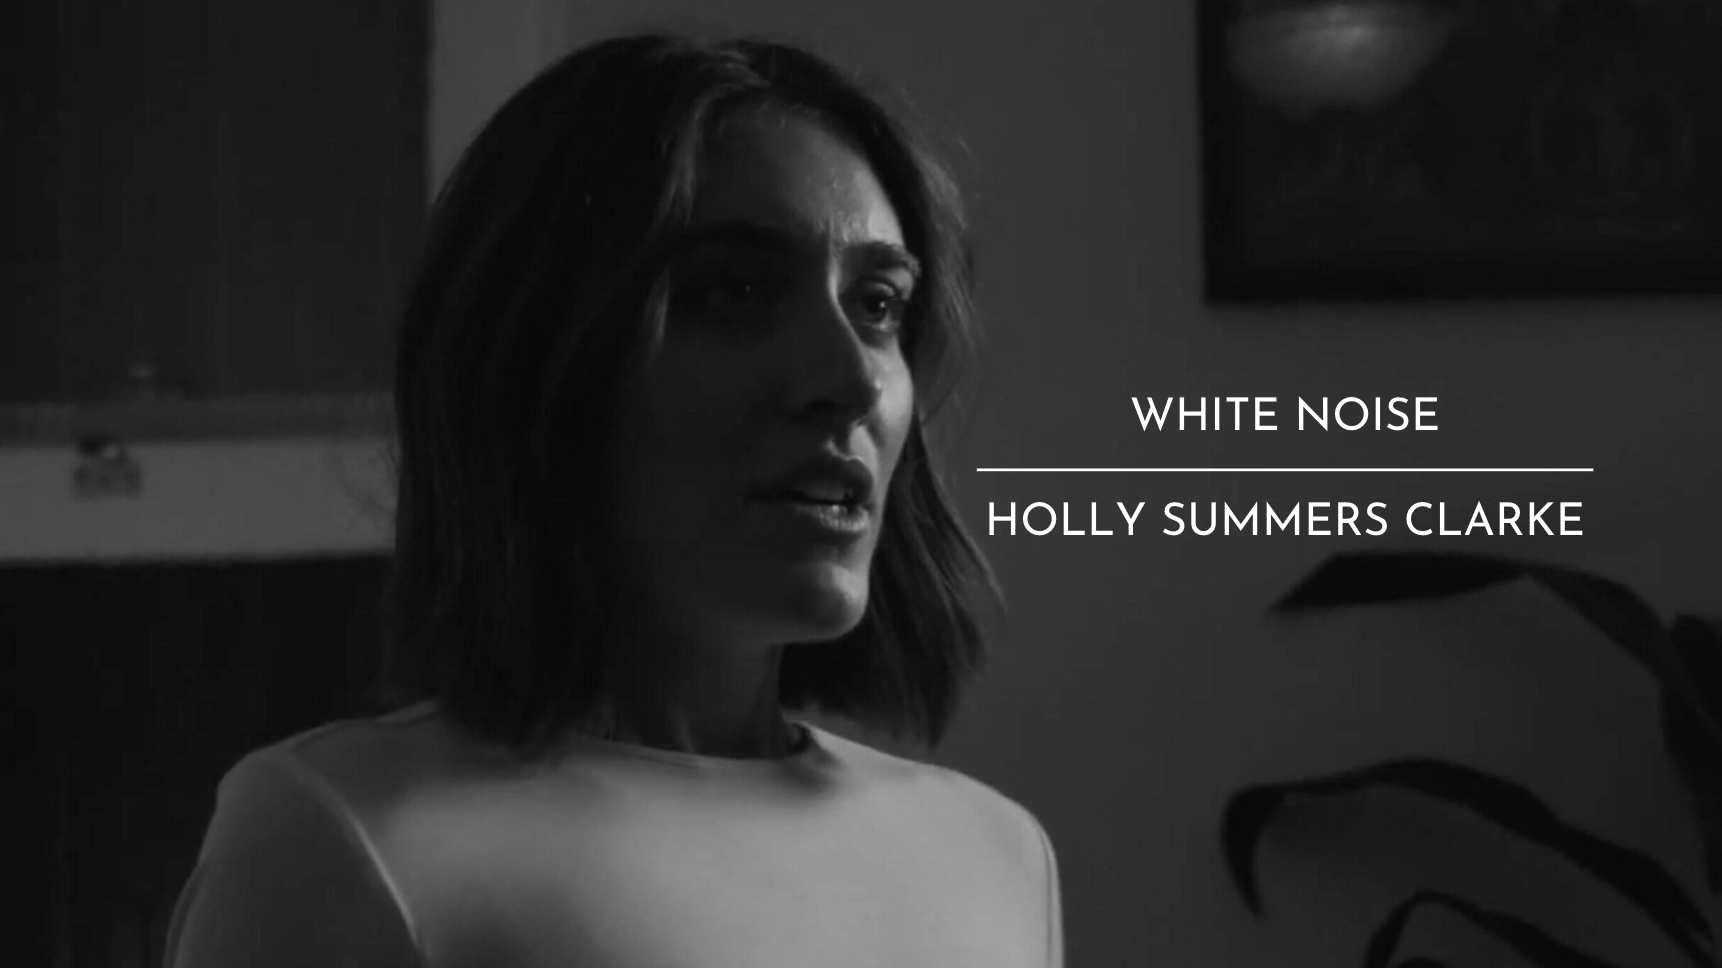 Holly Summers Clarke - White Noise